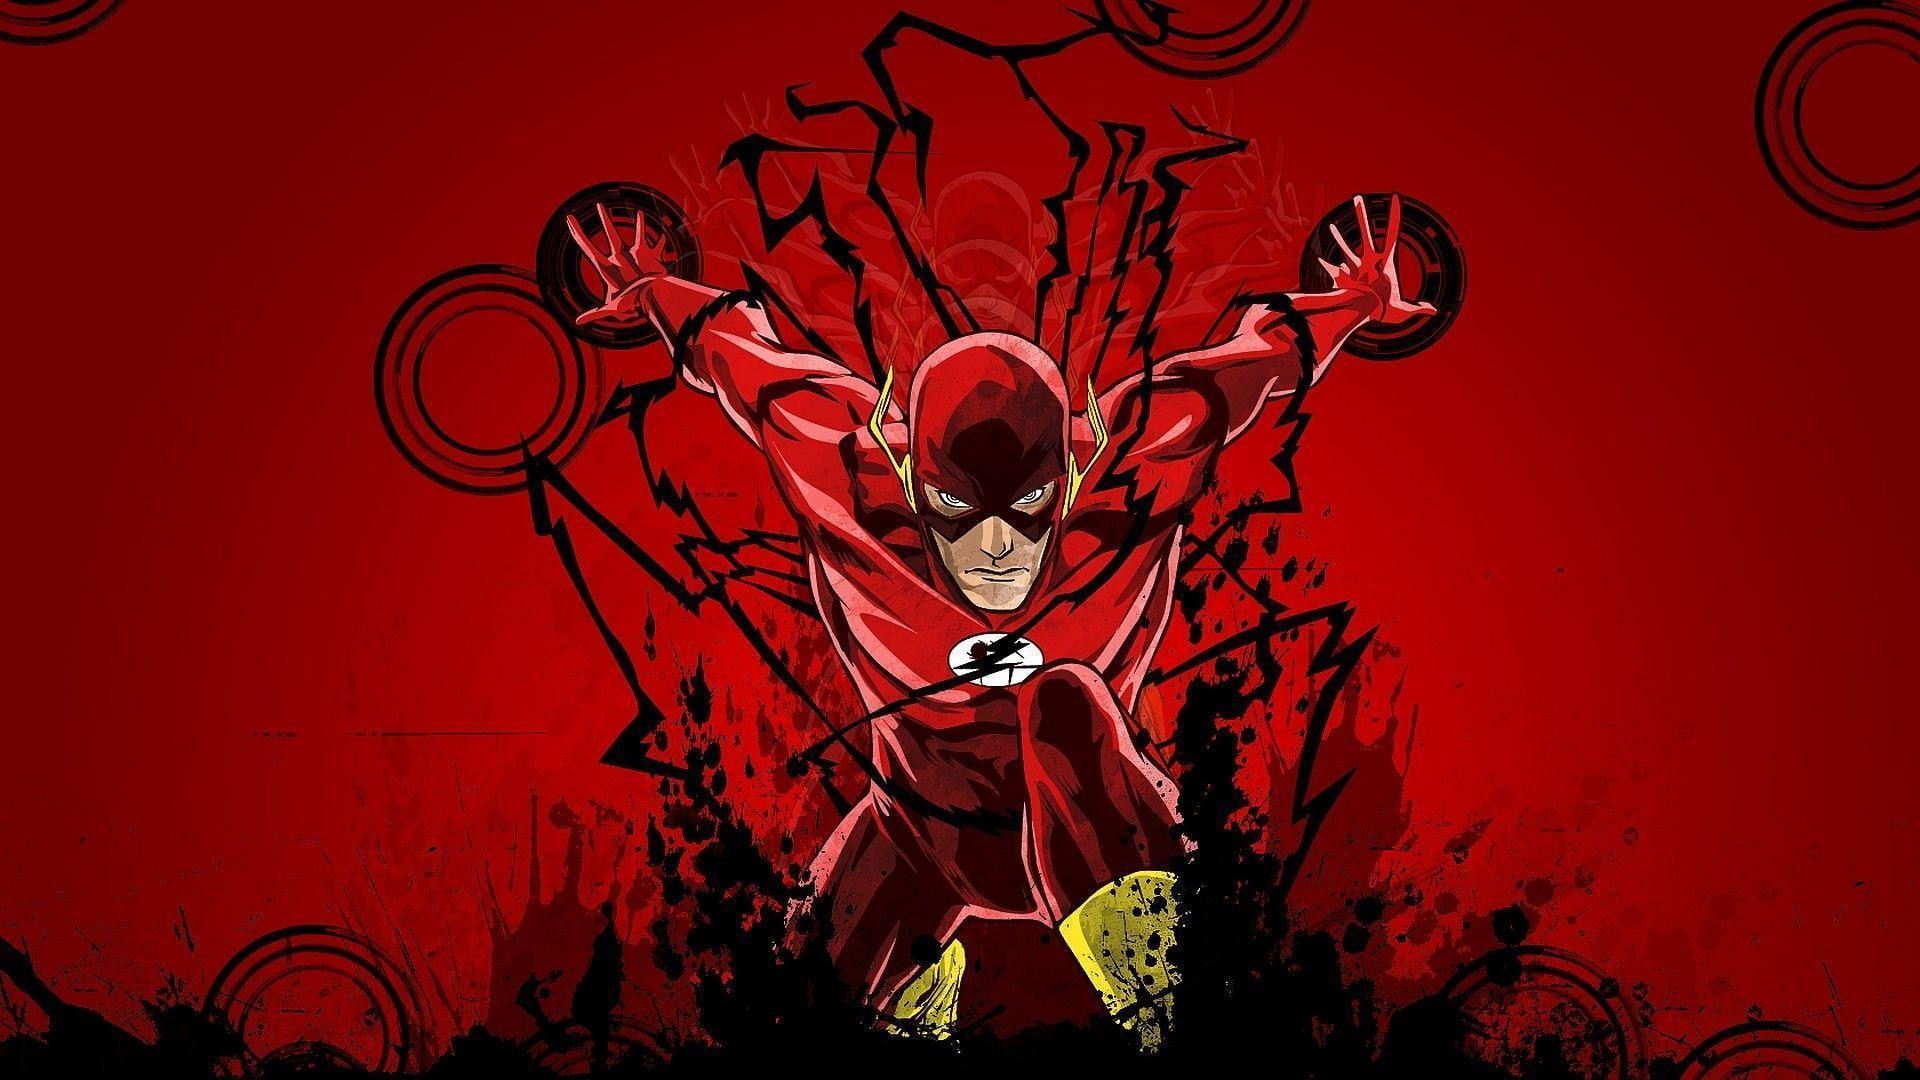 1920x1080 Download Free 10 Best The Flash Wallpapers